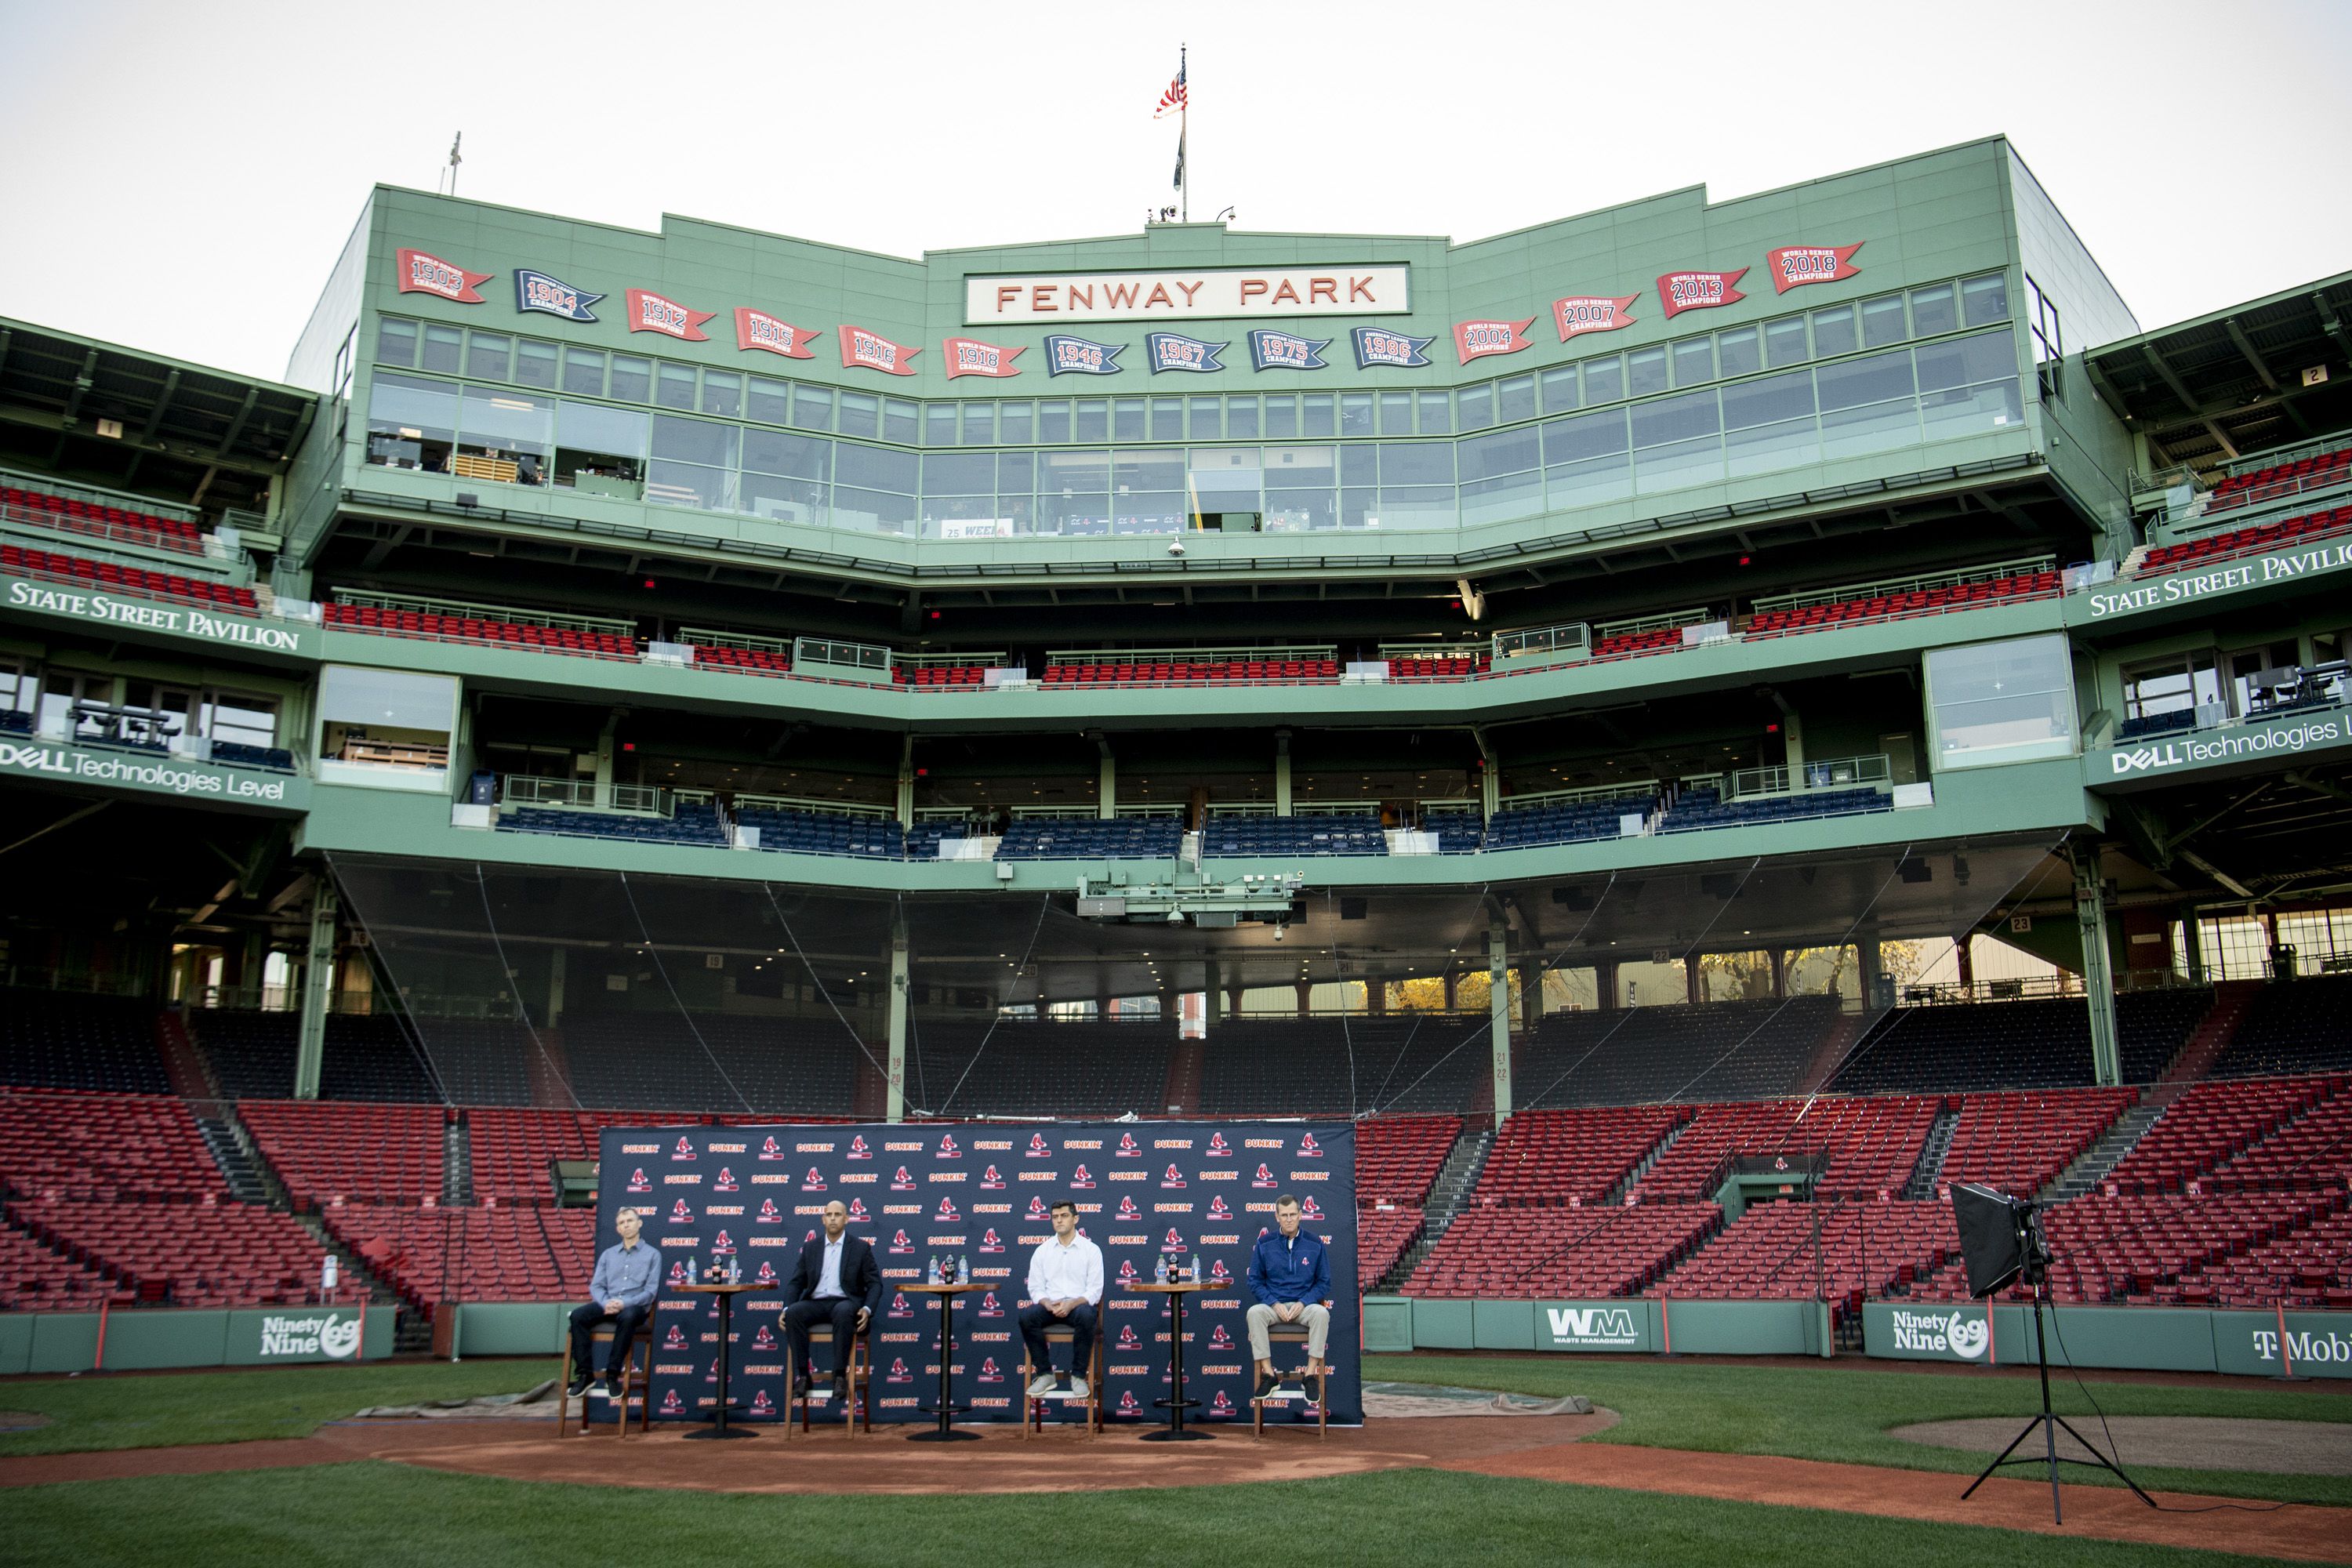 Red Sox reportedly view Fenway Park as place with no expiration date